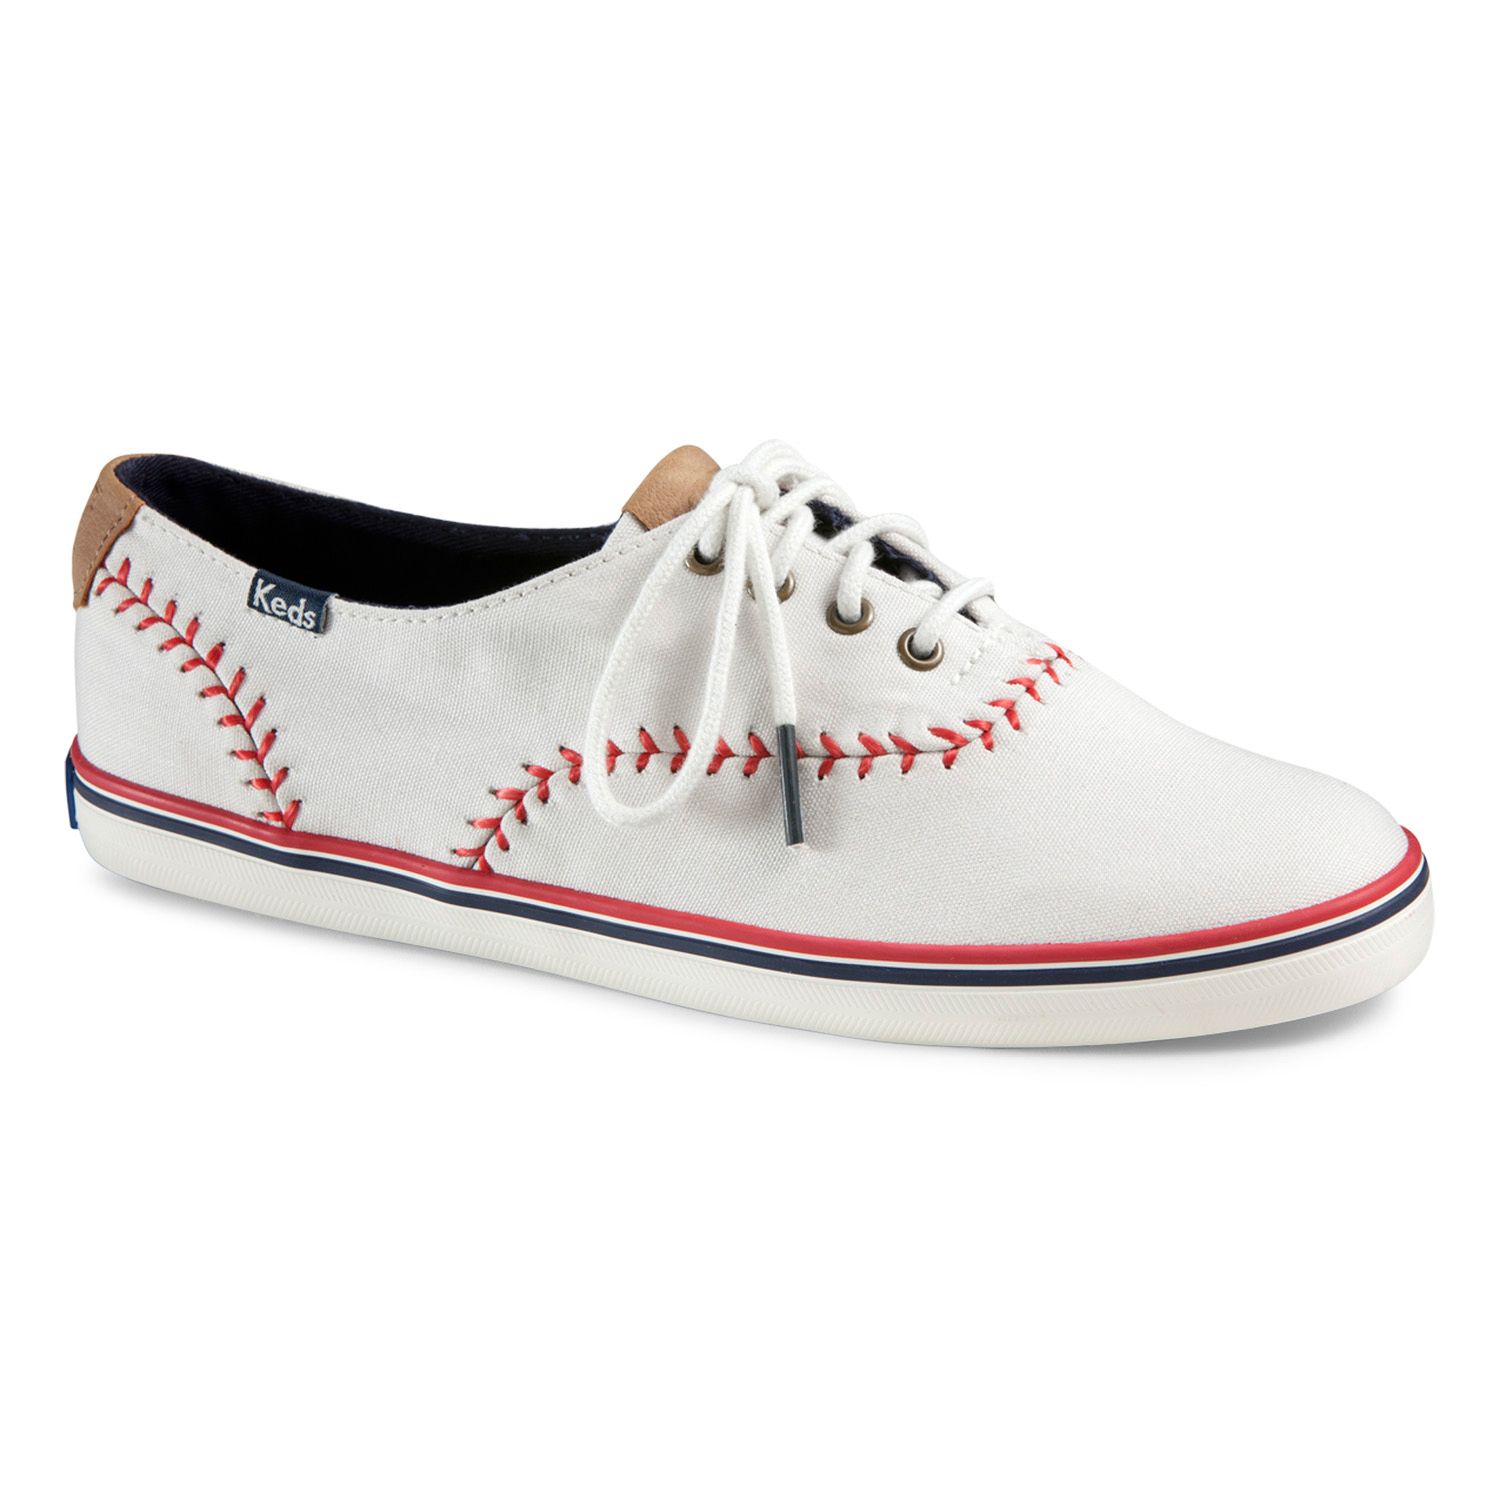 keds champion oxford shoes